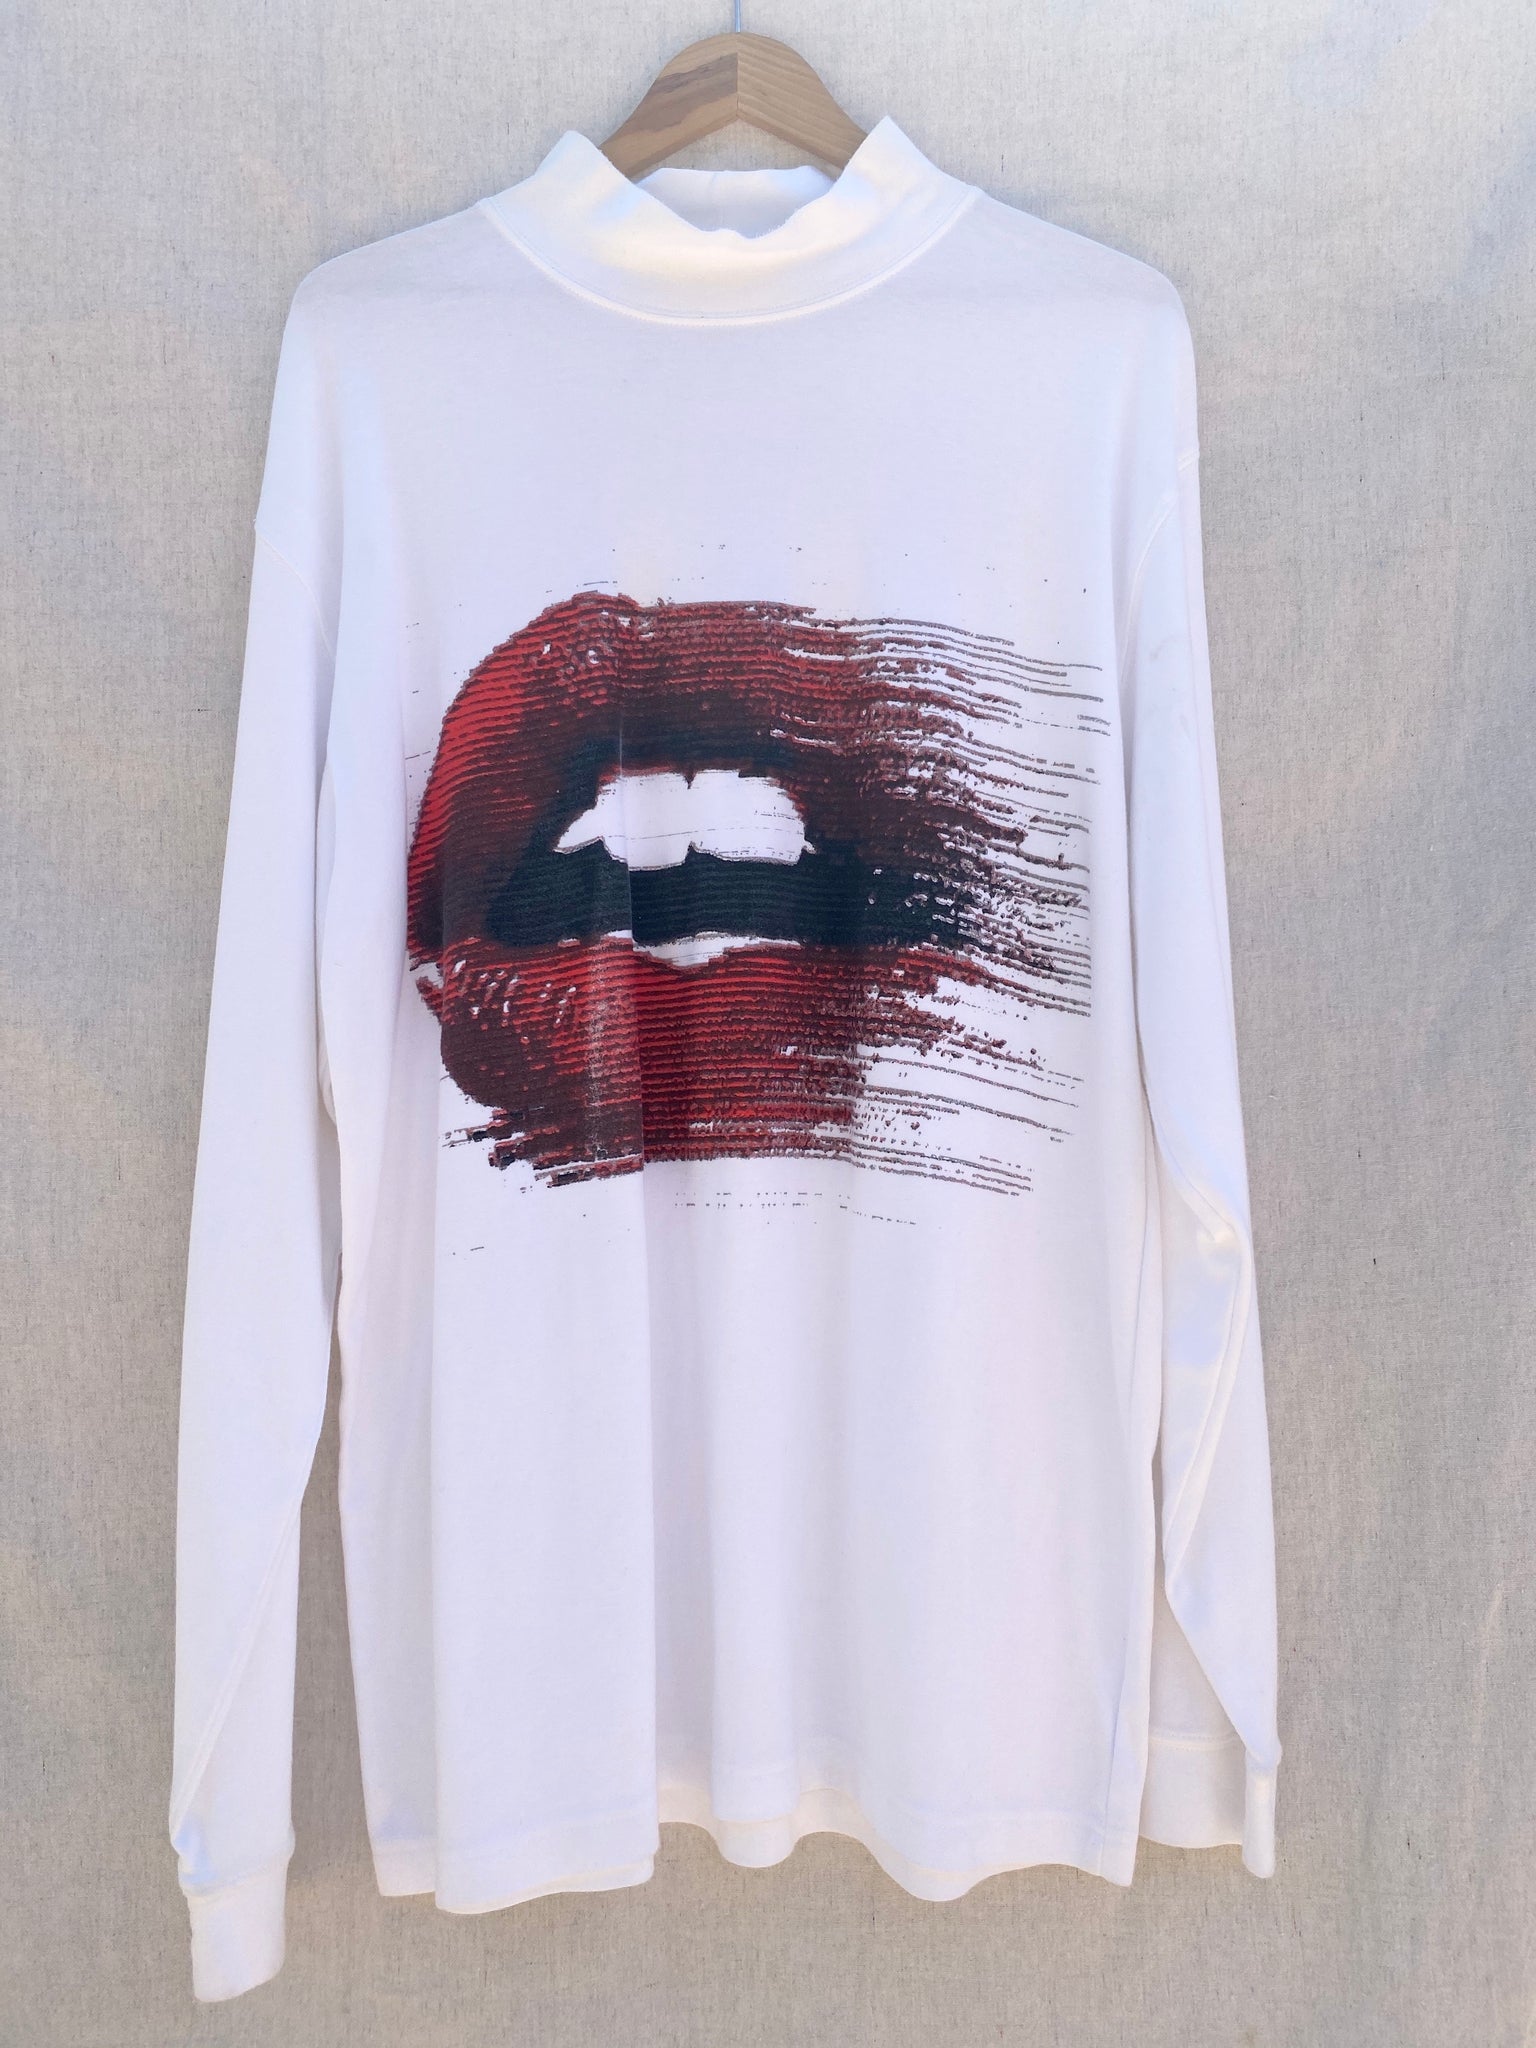 FONT VIEW OF WHITE LONG SLEEVES TEE WITH MOCK NECK. PRINTED WITH MOUTH WITH RED LIPS.